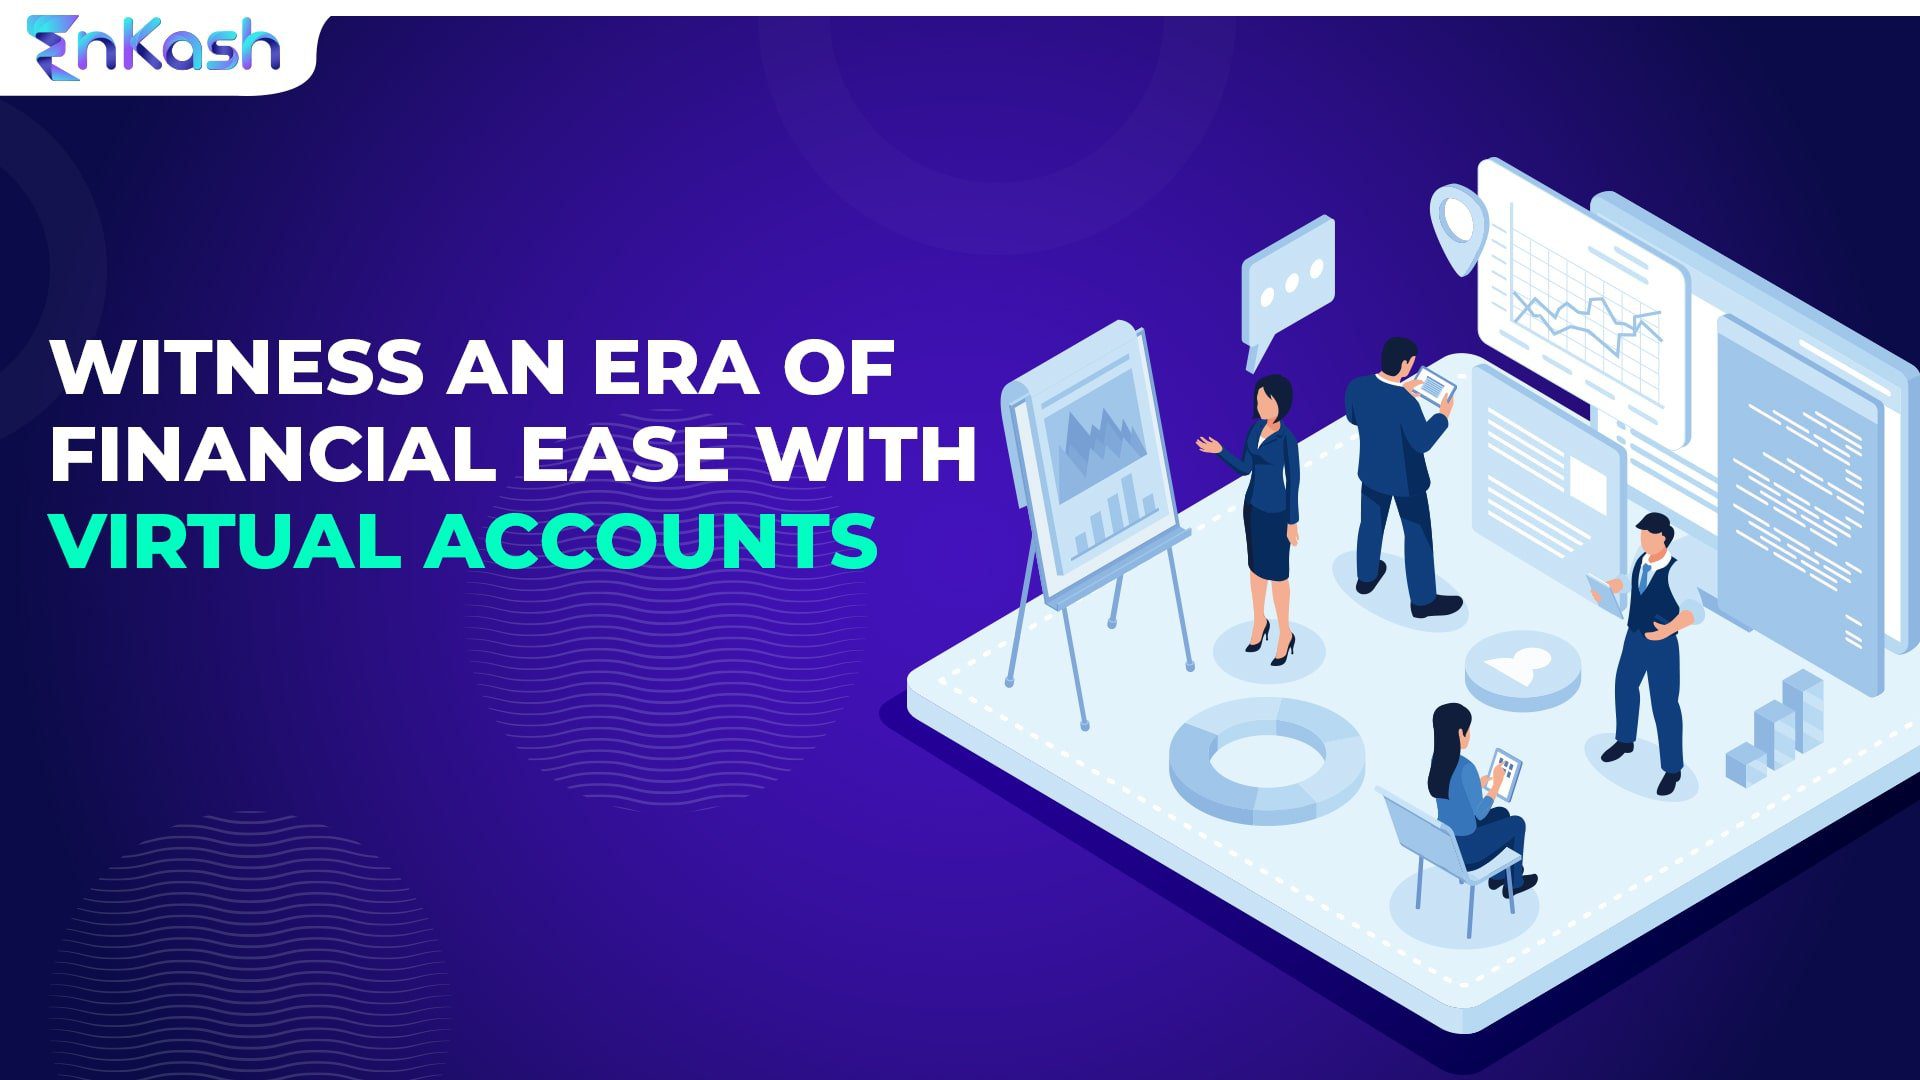 Witness an era of financial ease with with virtual accounts